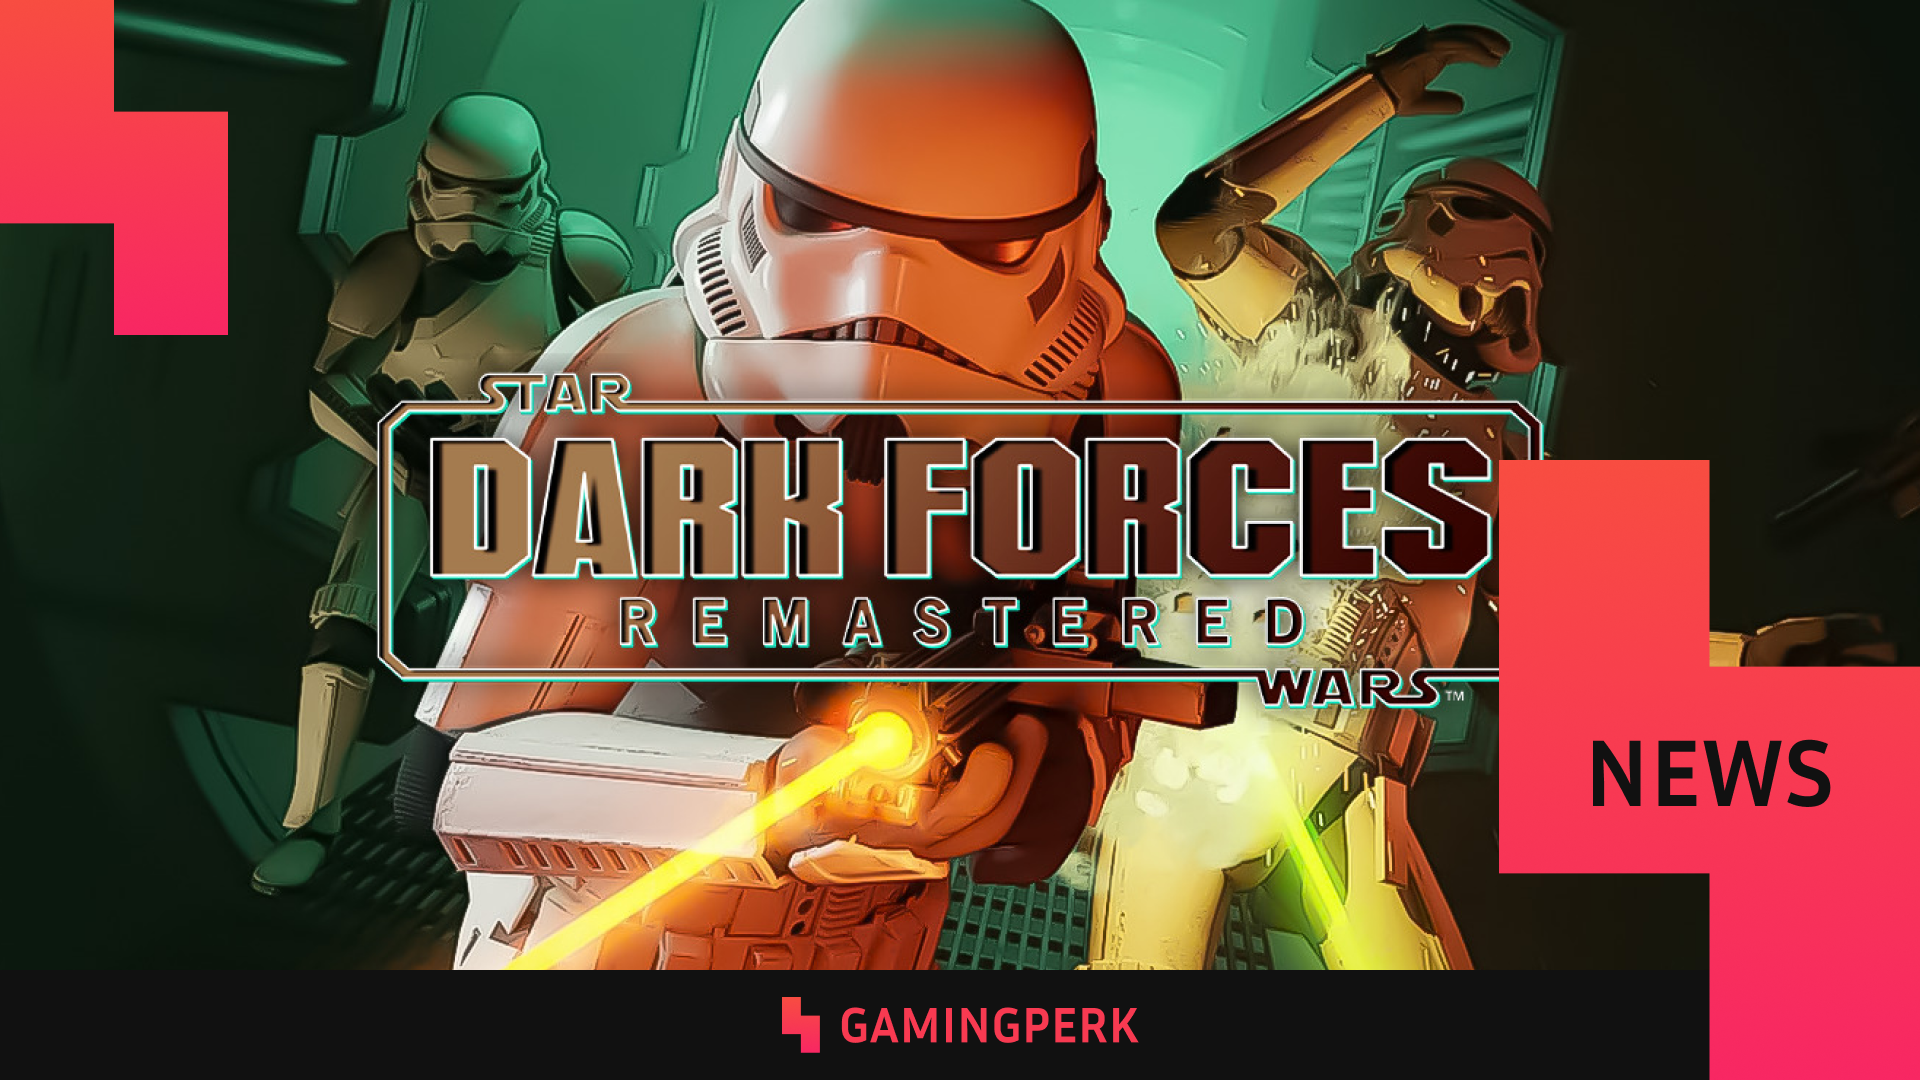 Star Wars: Dark Forces - A remaster of a 90s shooter classic